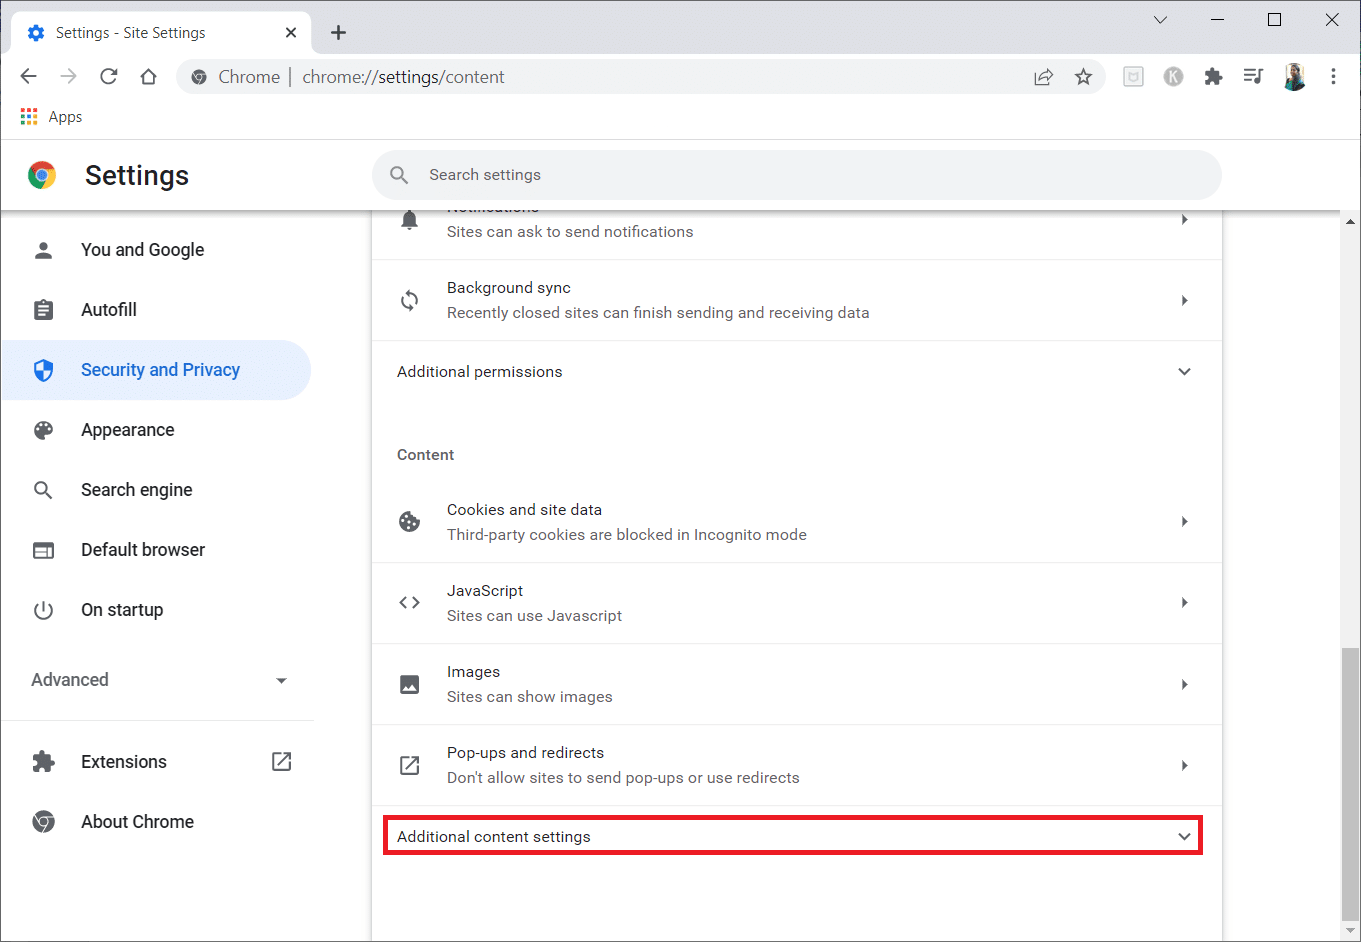 Scroll down and expand the Additional content settings option